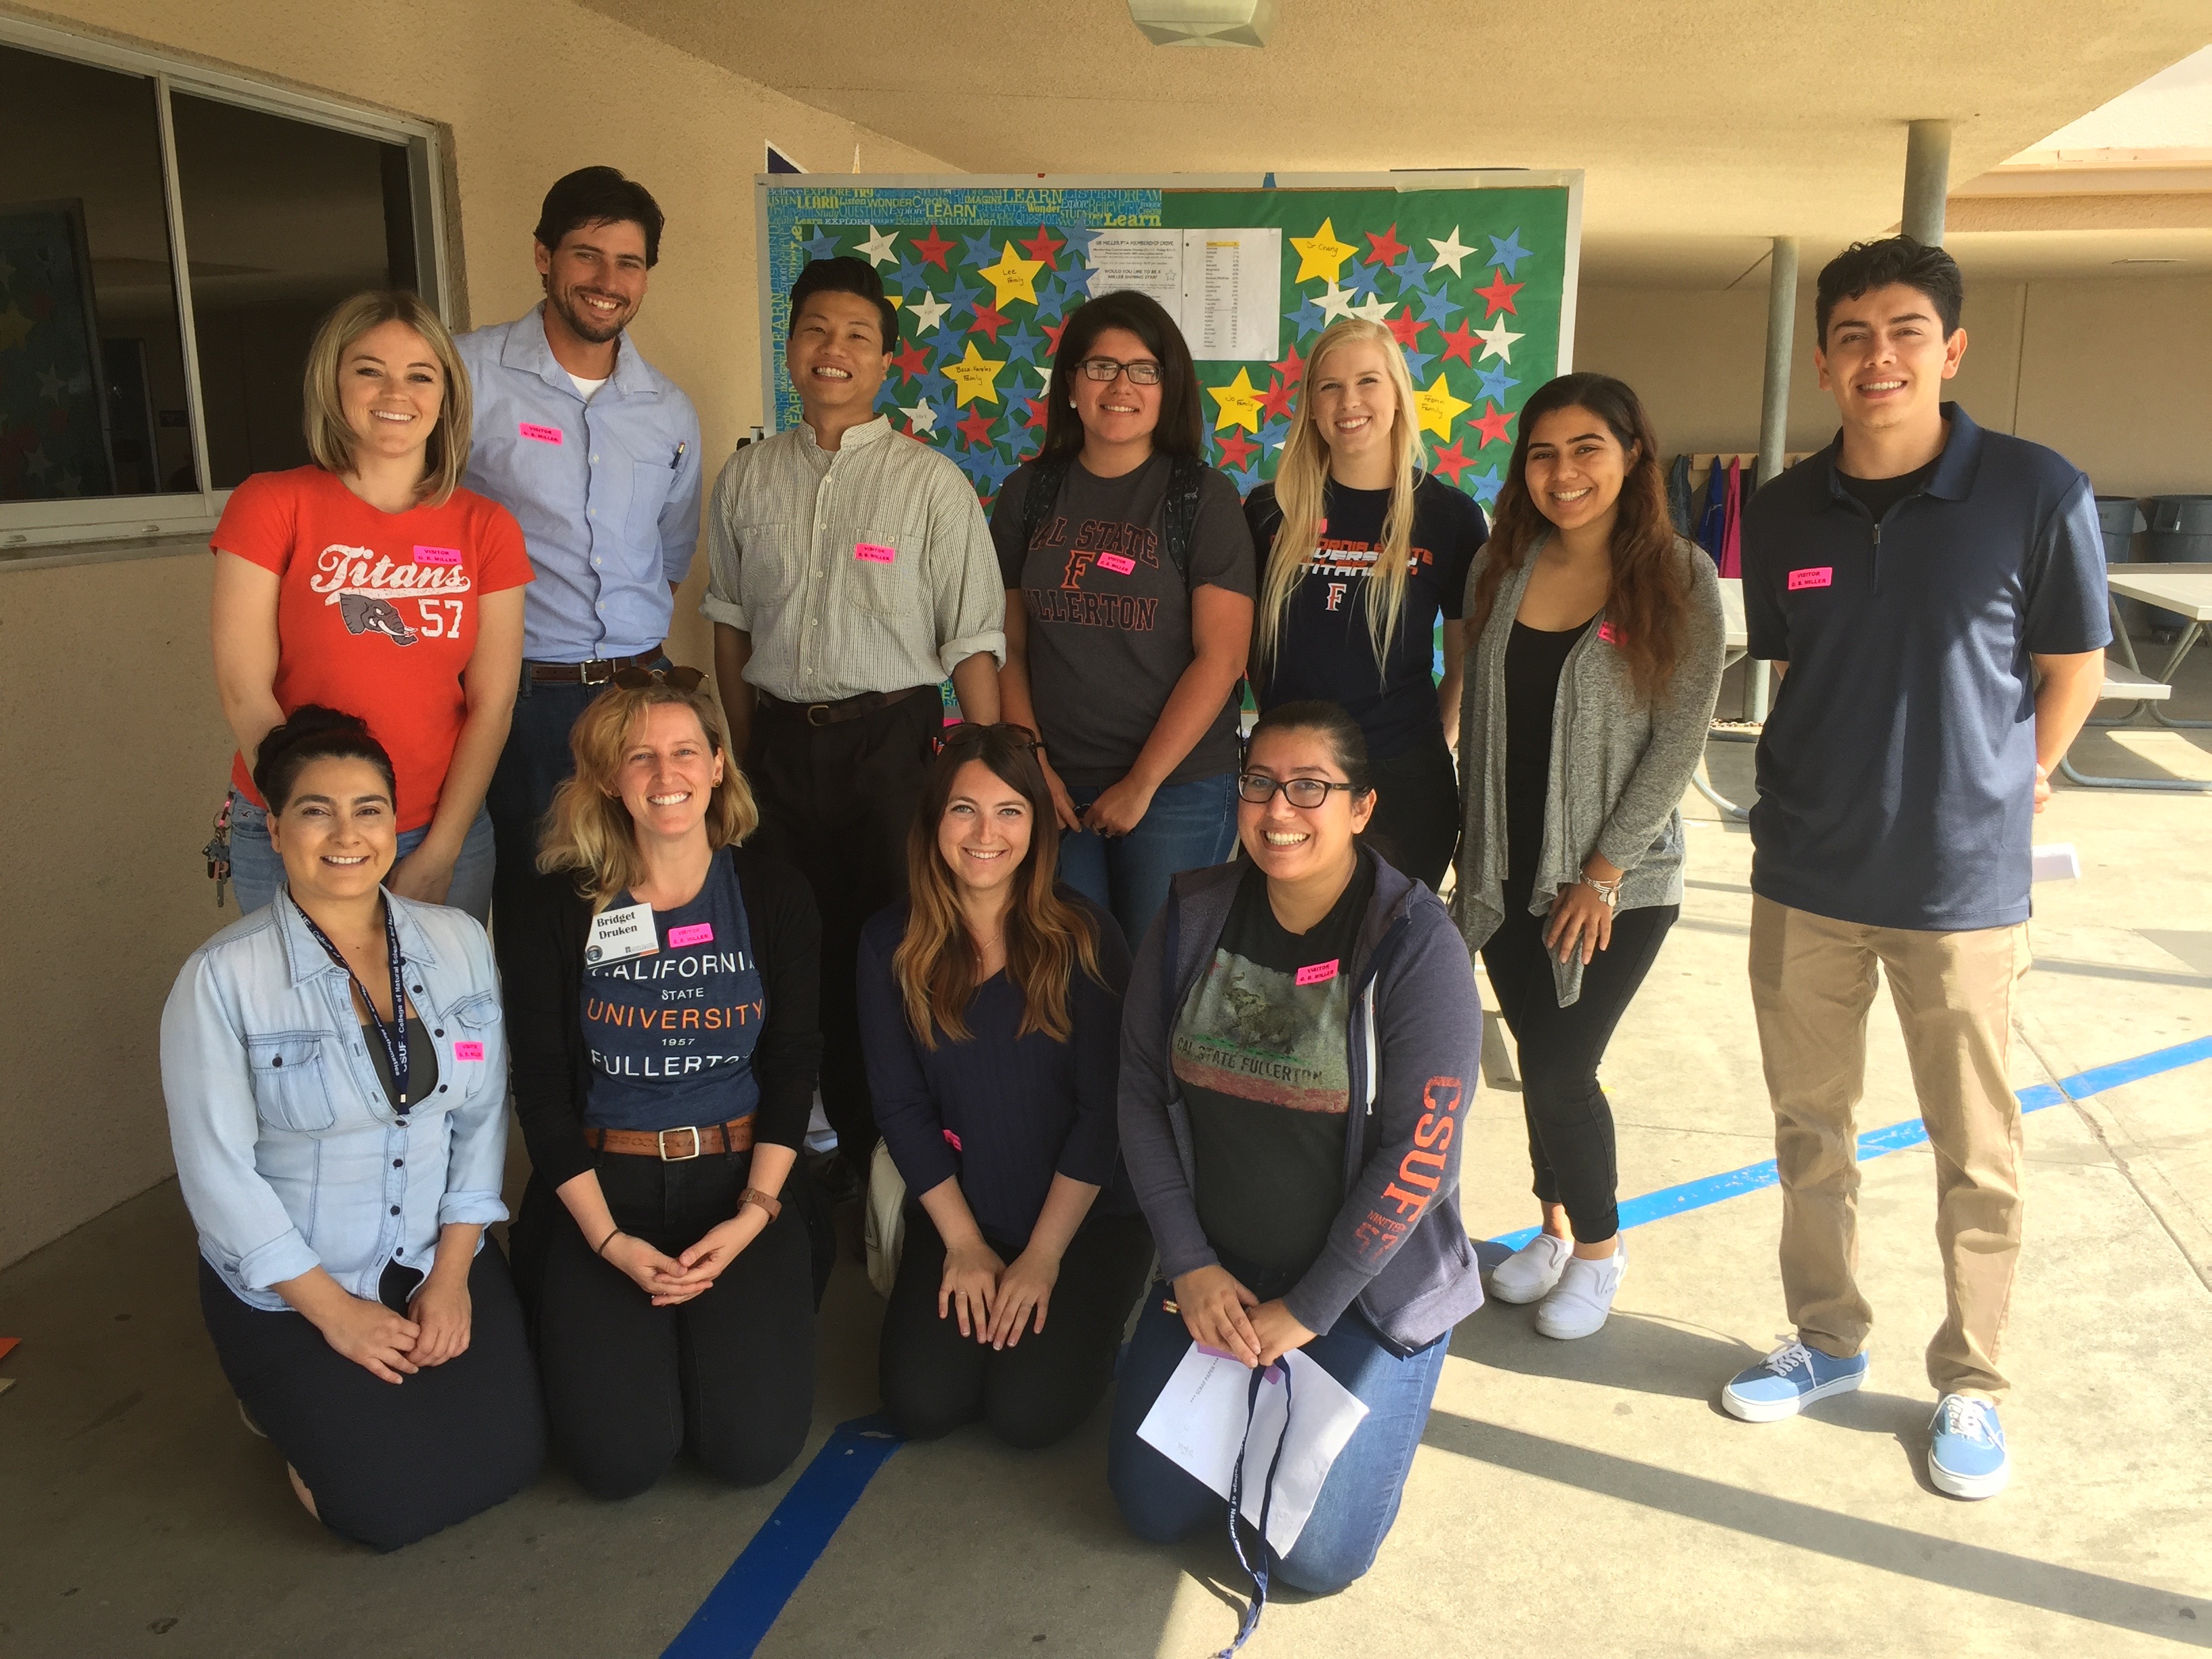 Elementary school visit to co-teach geometry lessons with CSUF students, May 2018